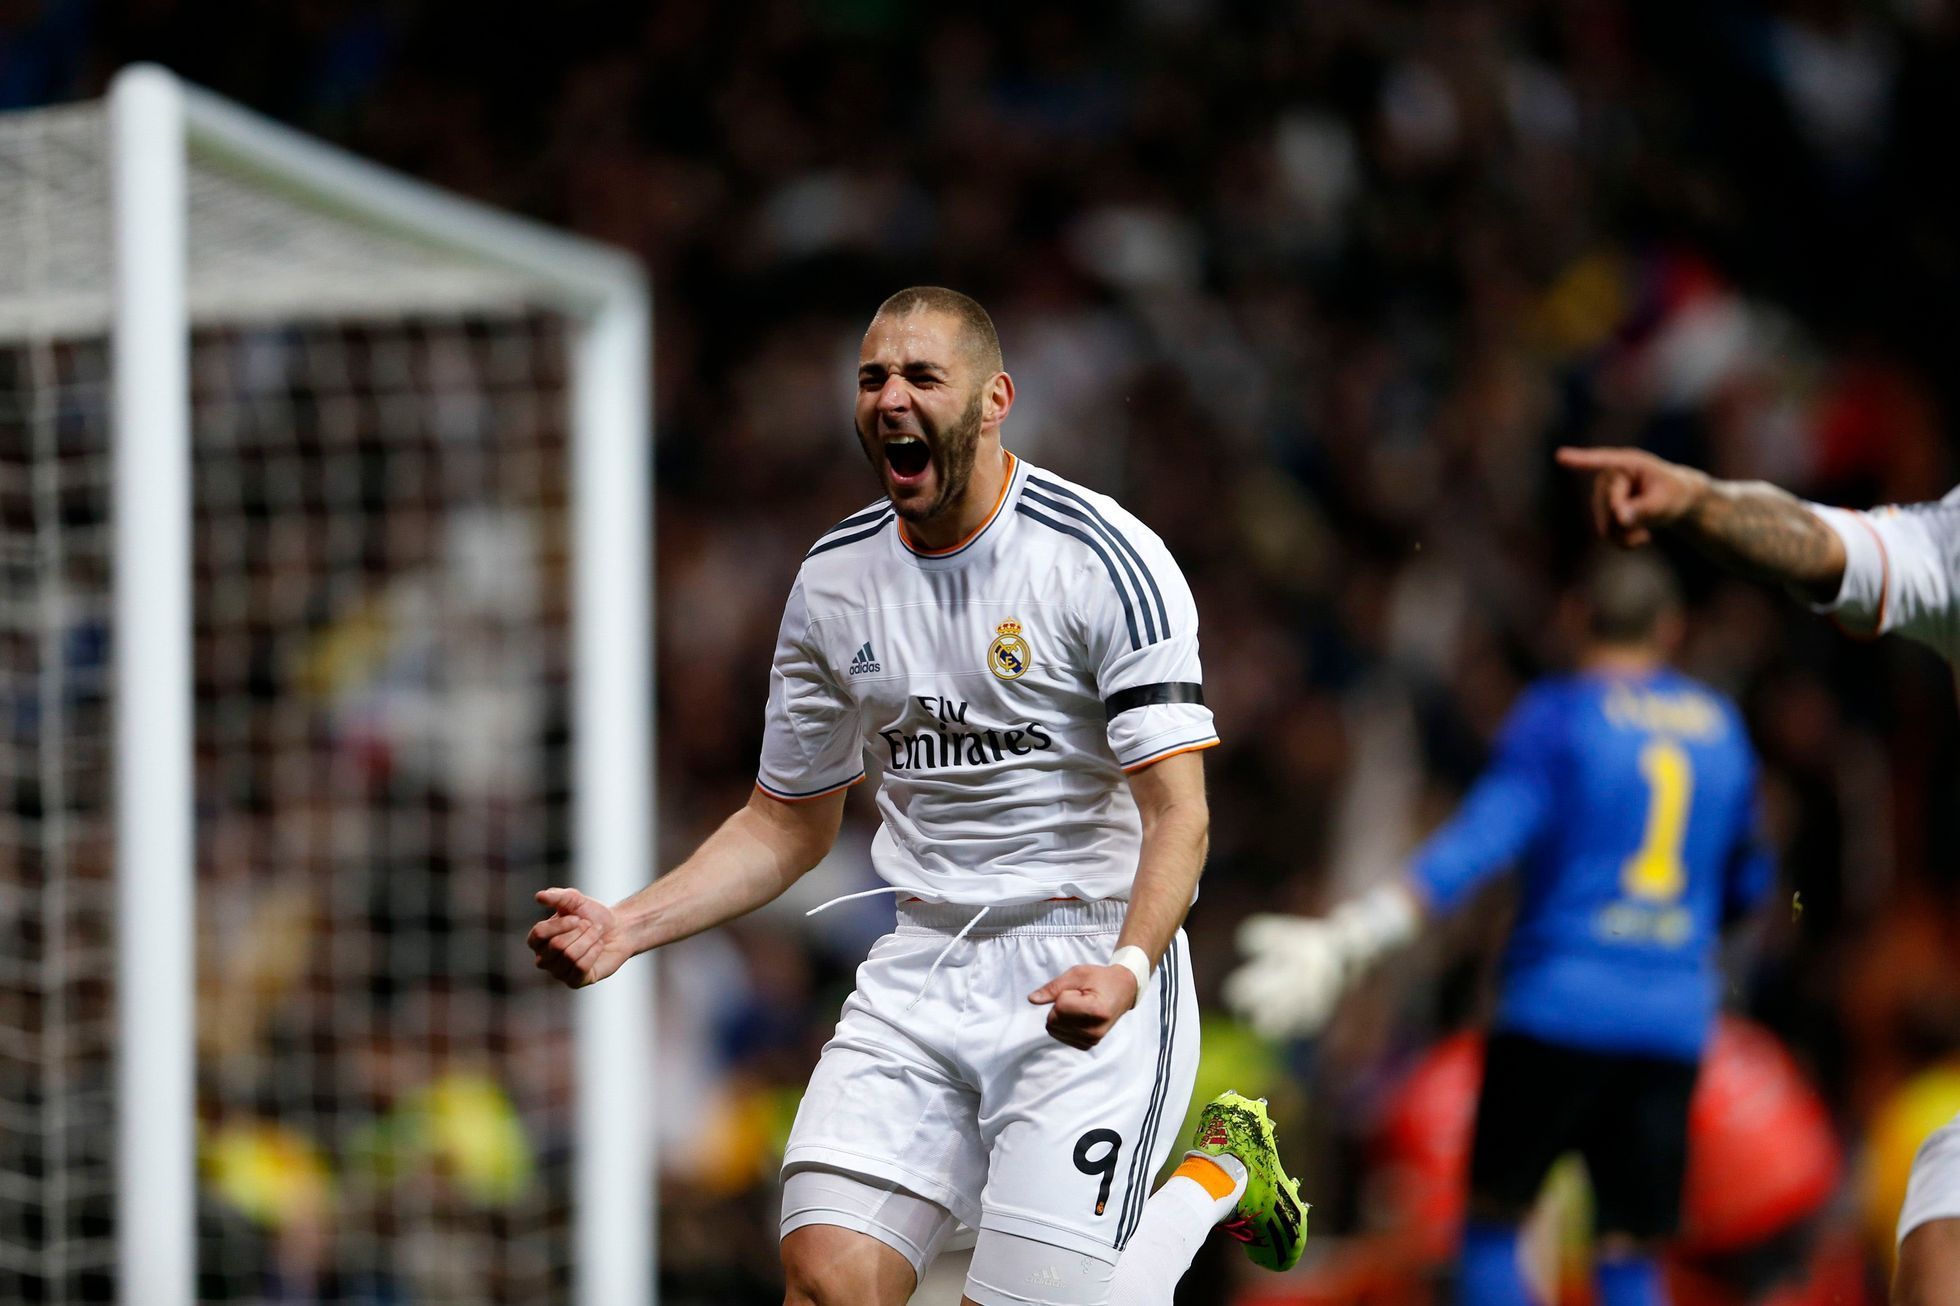 Real Madrid's Karim Benzema celebrates a goal against Barcelona during La Liga's second 'Clasico' soccer match of the season in Madrid